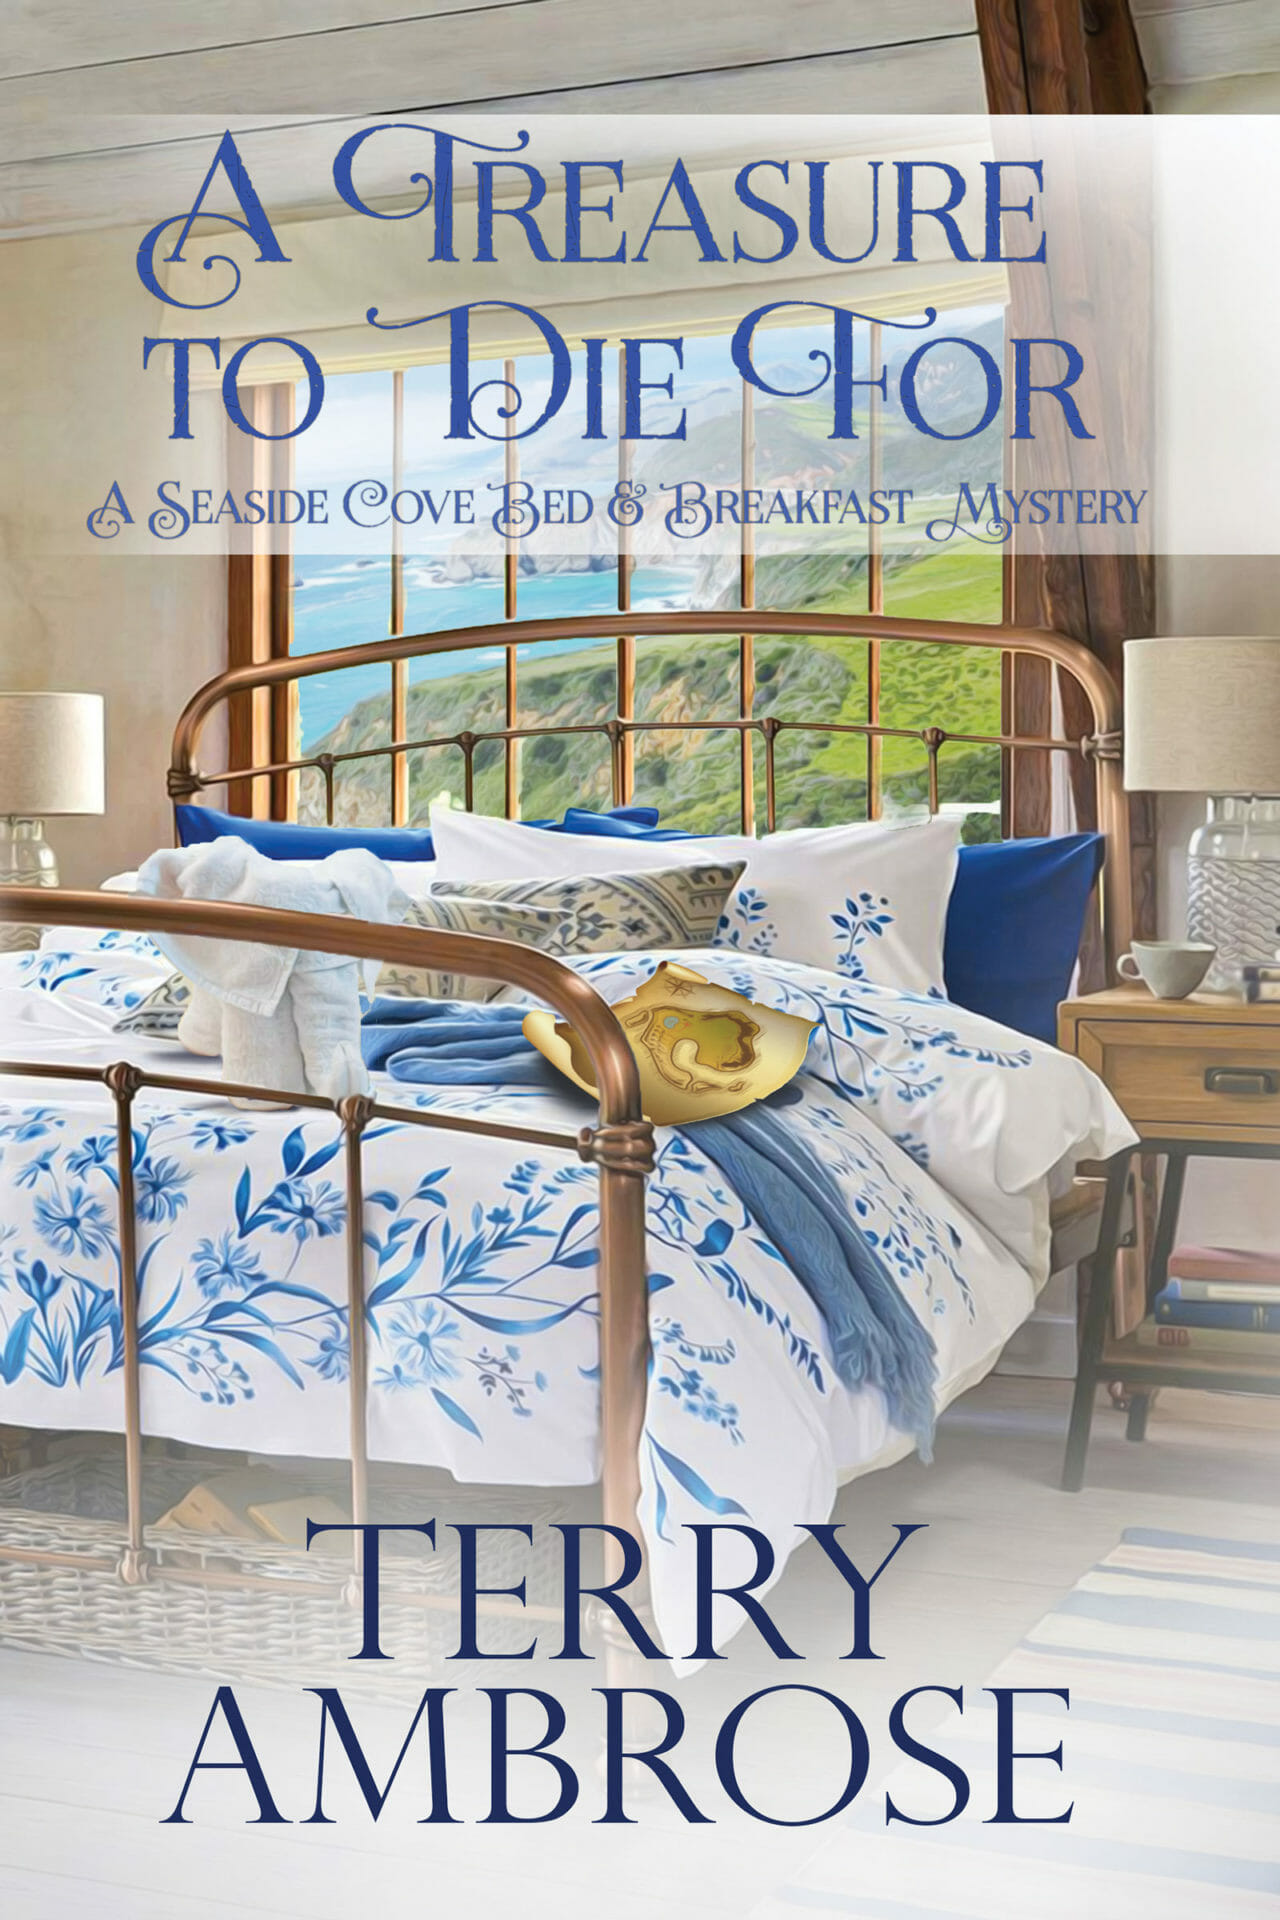 A Treasure to Die For Seaside Cove Bed & Breakfast Mystery #1